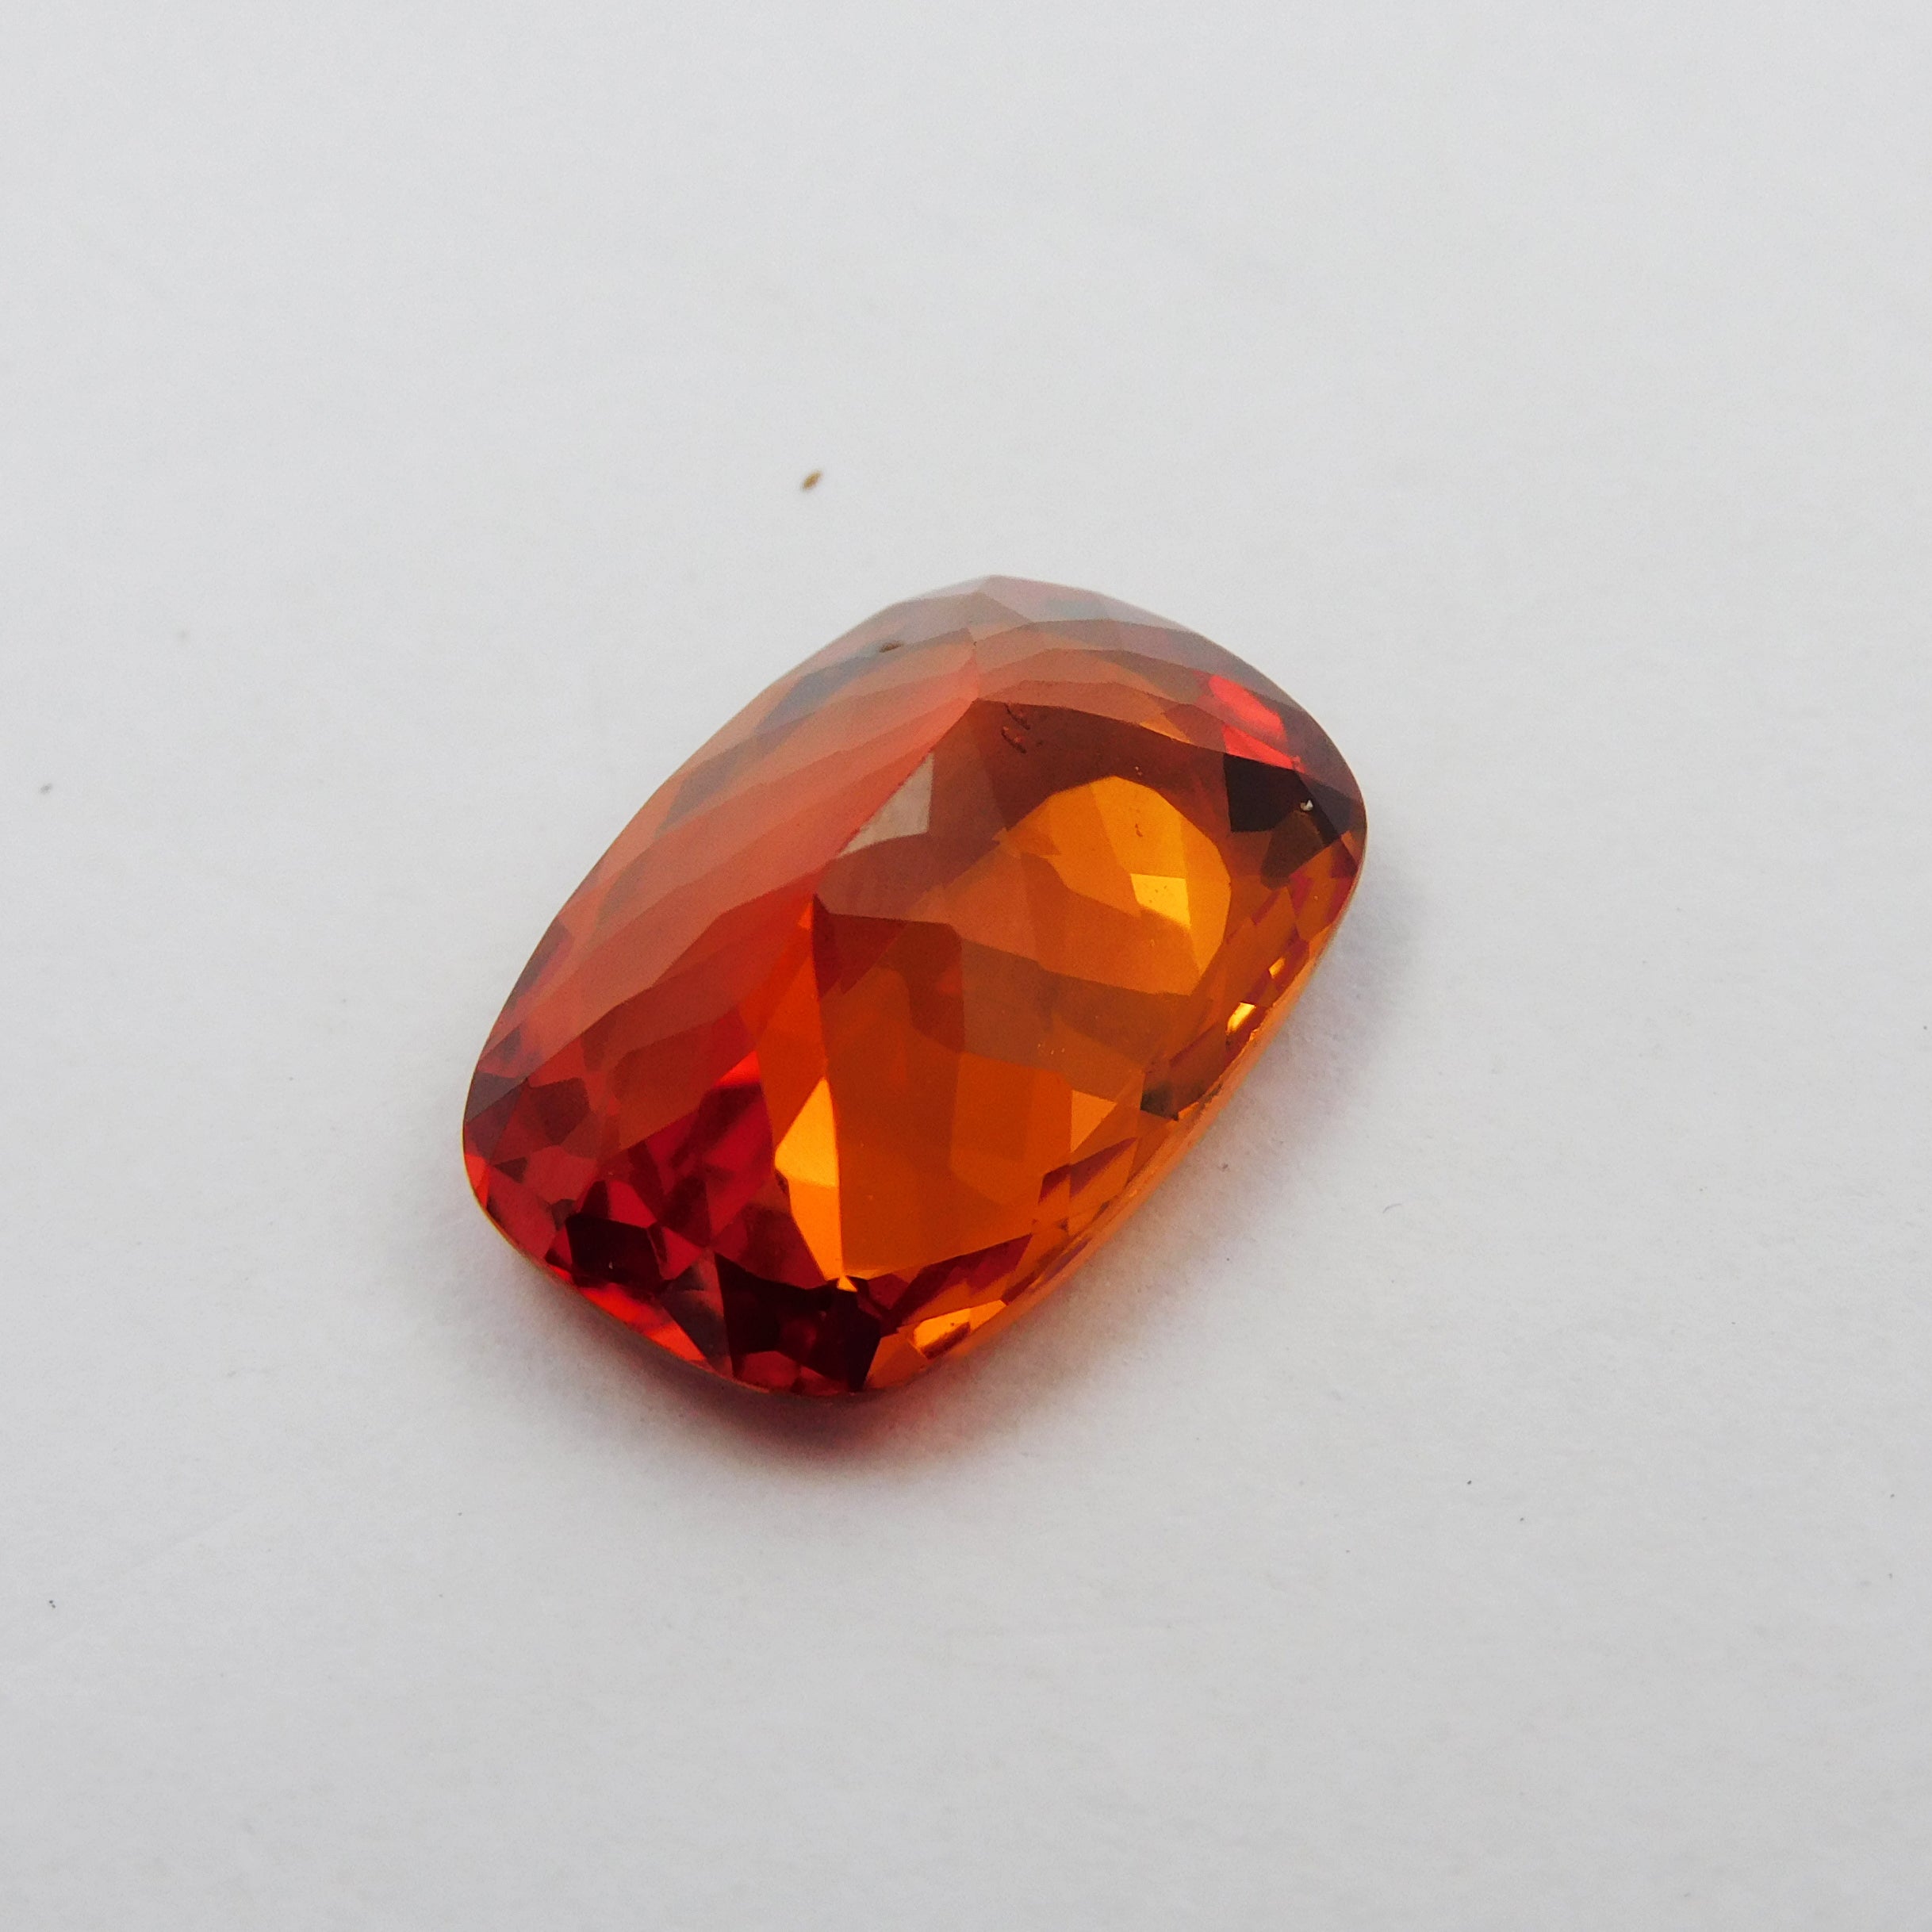 For Beautiful Jwelery !! Cushion Cut 7.25 Carat Natural Orange Sapphire CERTIFIED Loose Gemstone | Gift For Her / Him | Superior Offer